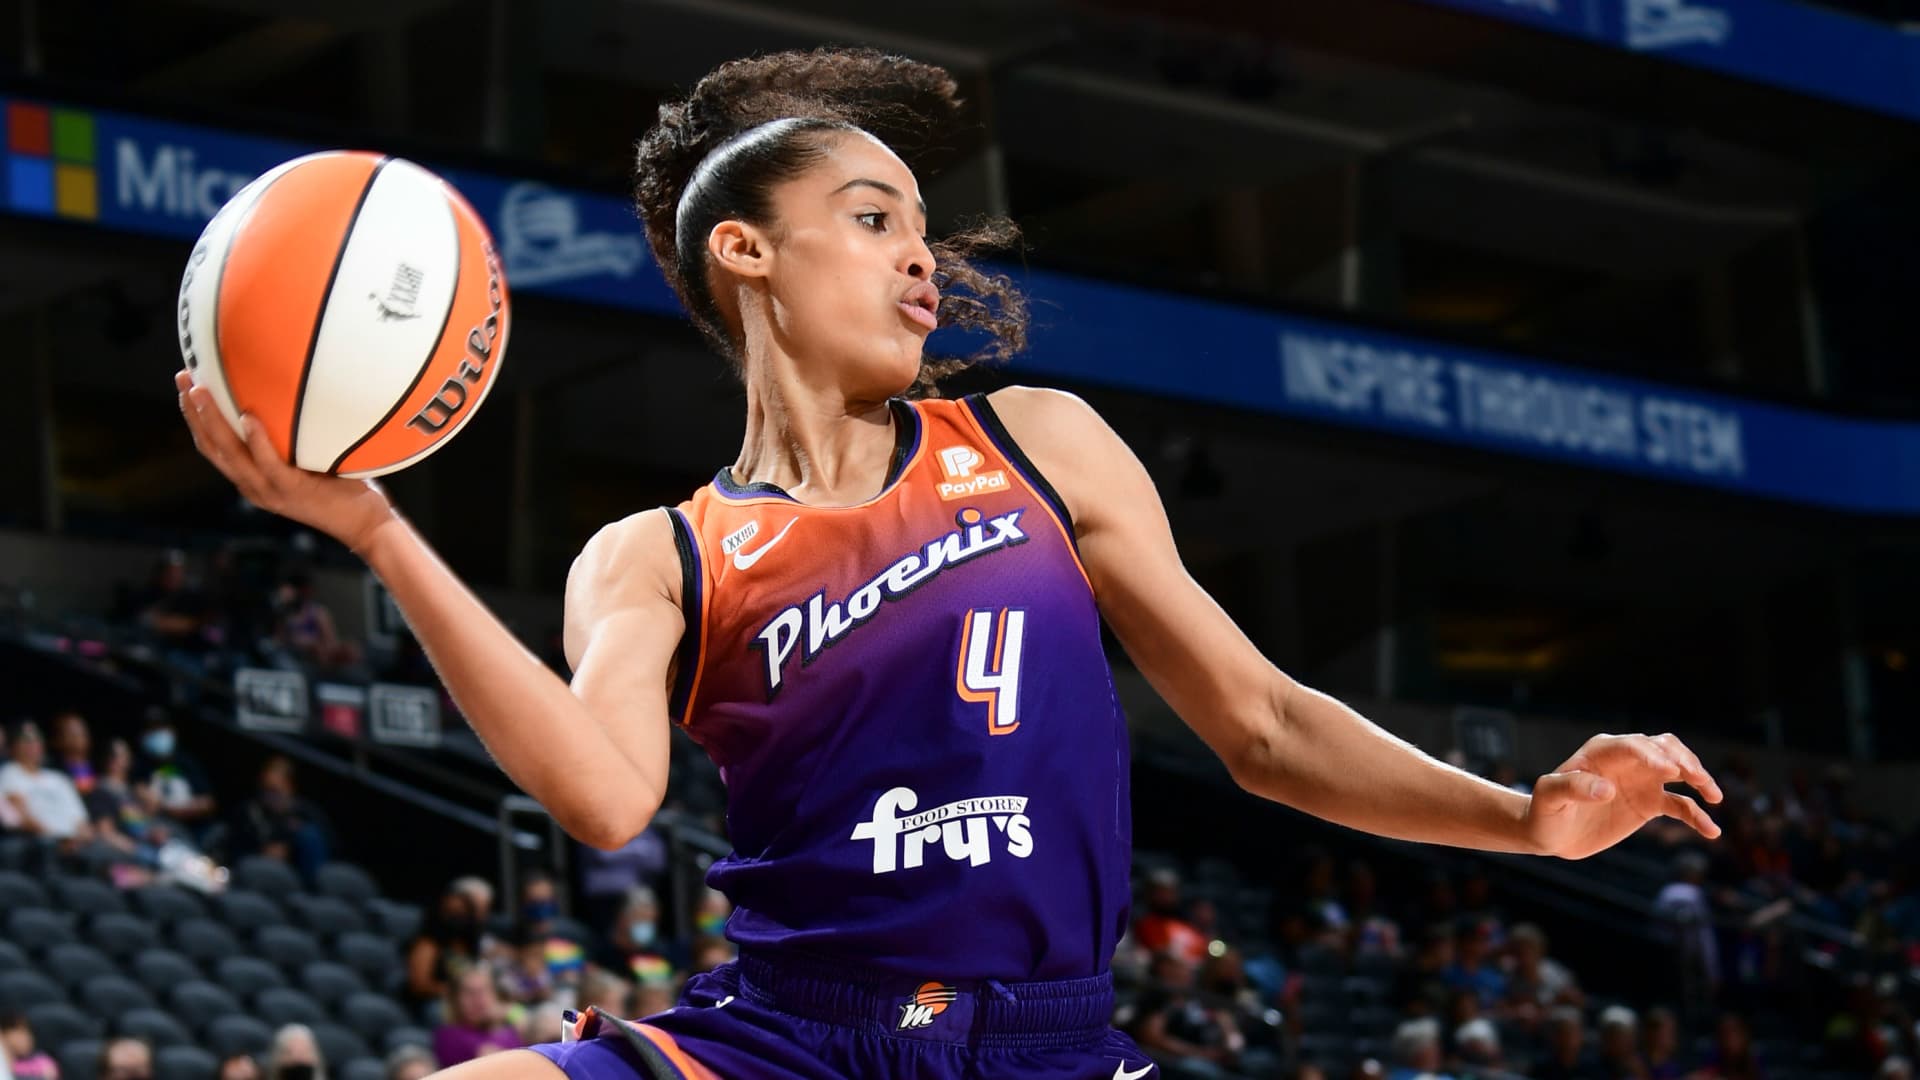 Skylar Diggins-Smith #4 of the Phoenix Mercury looks to pass the ball during the game against the Dallas Wings on June 11, 2021 at Phoenix Suns Arena in Phoenix, Arizona.